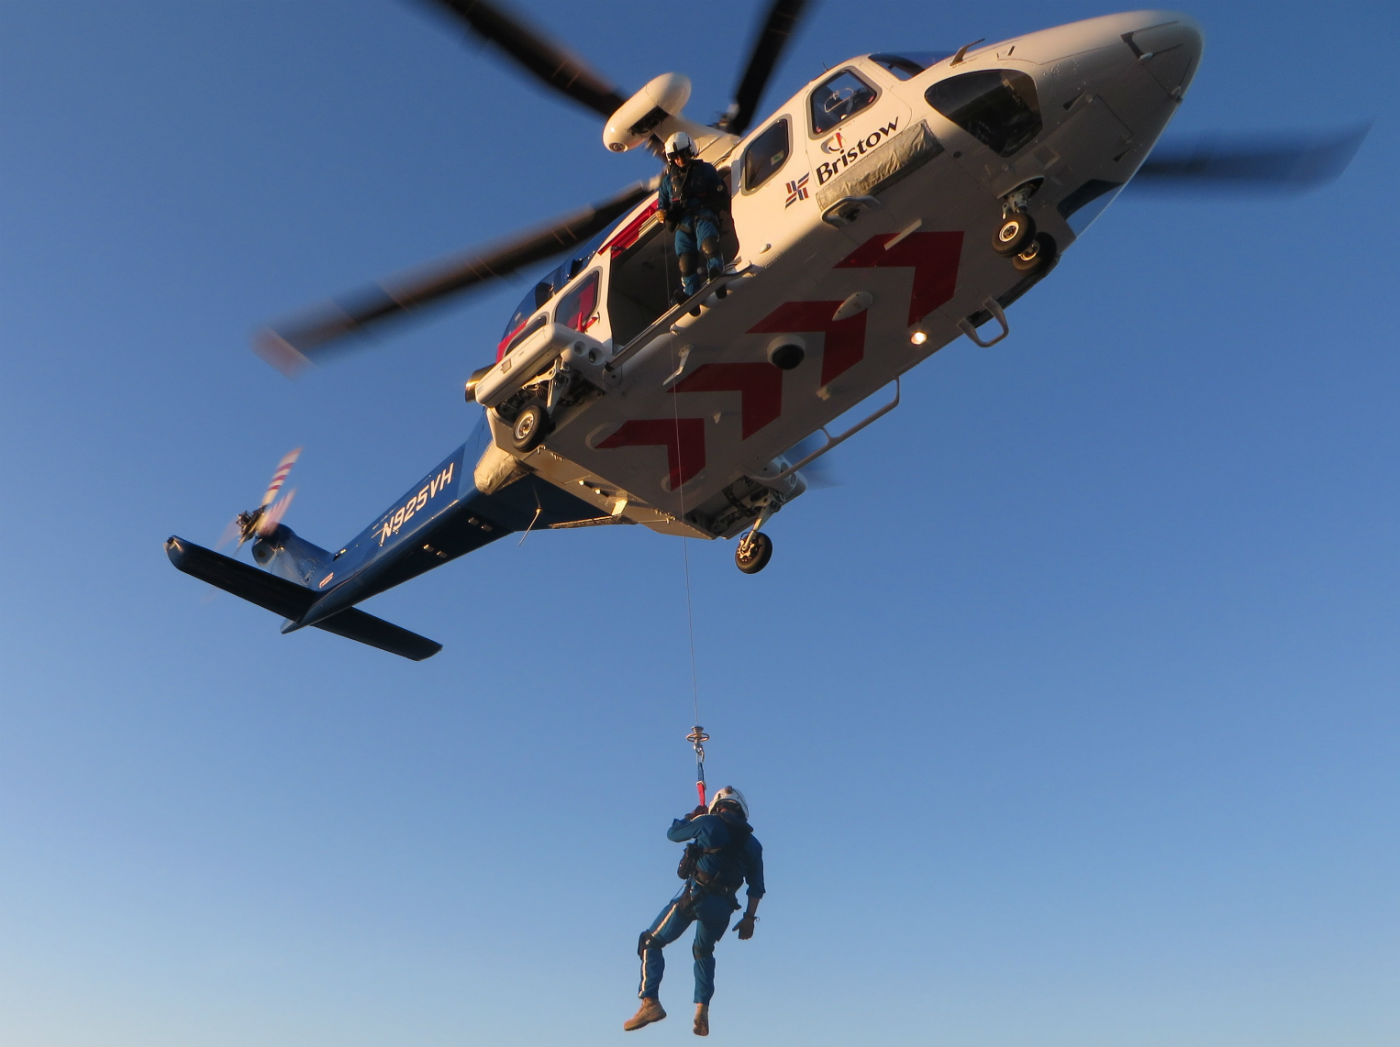 “Bristow has a long history of providing SAR capabilities around the world, with more than 65,000 SAR hours flown,” said Bristow Americas regional director Samantha Willenbacher.